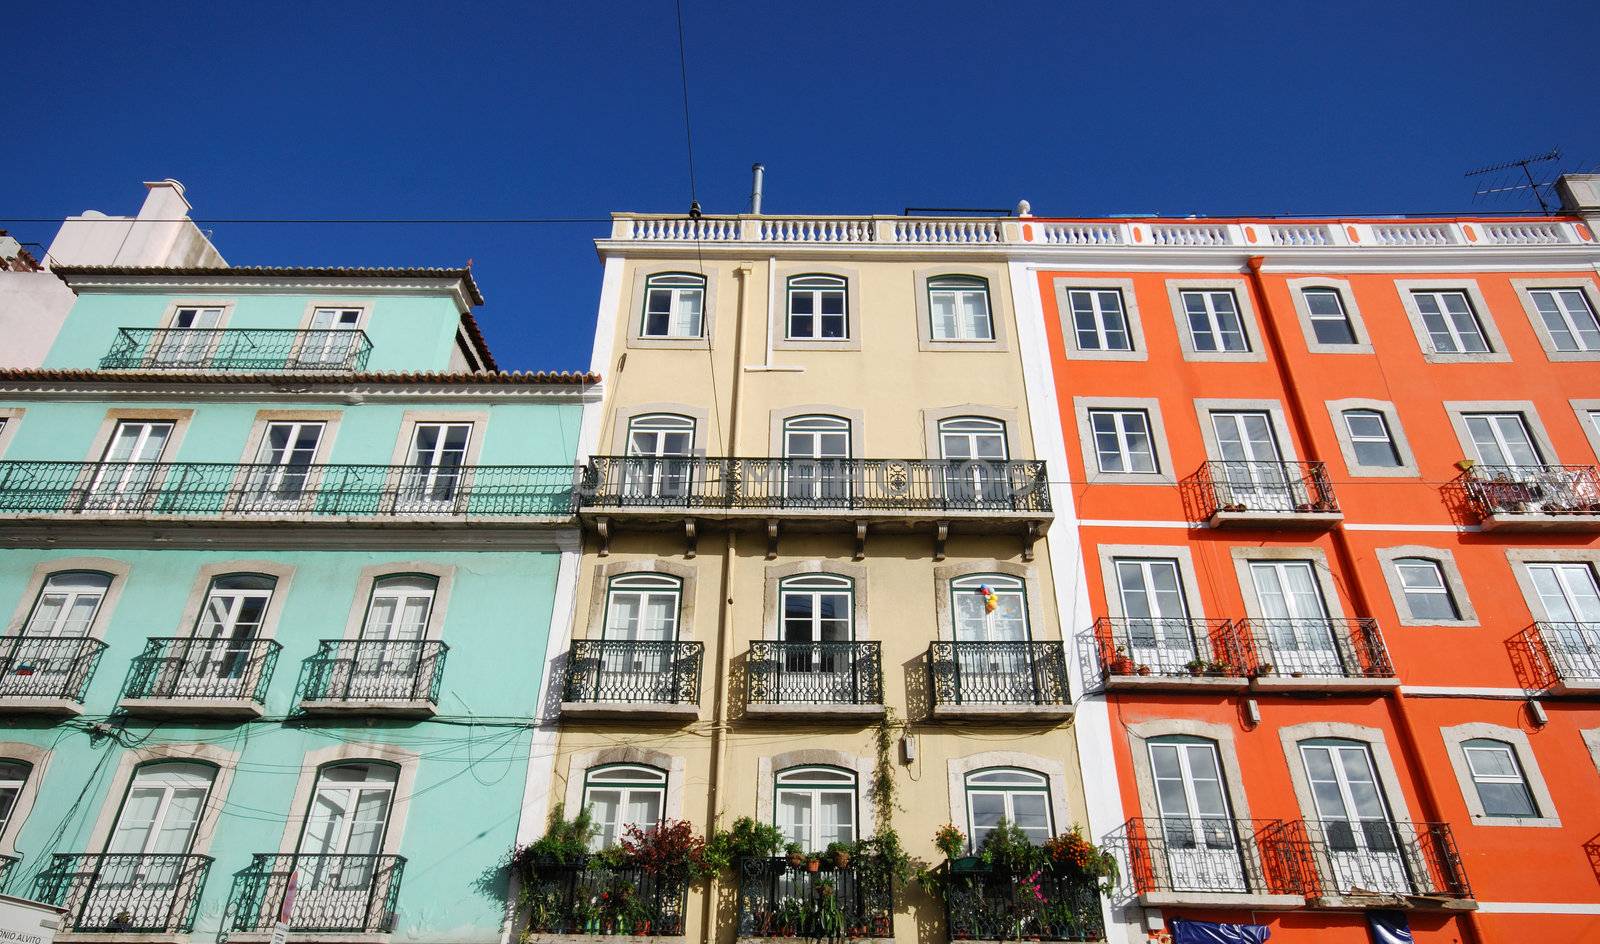 three facades of different colored houses in Lisbon